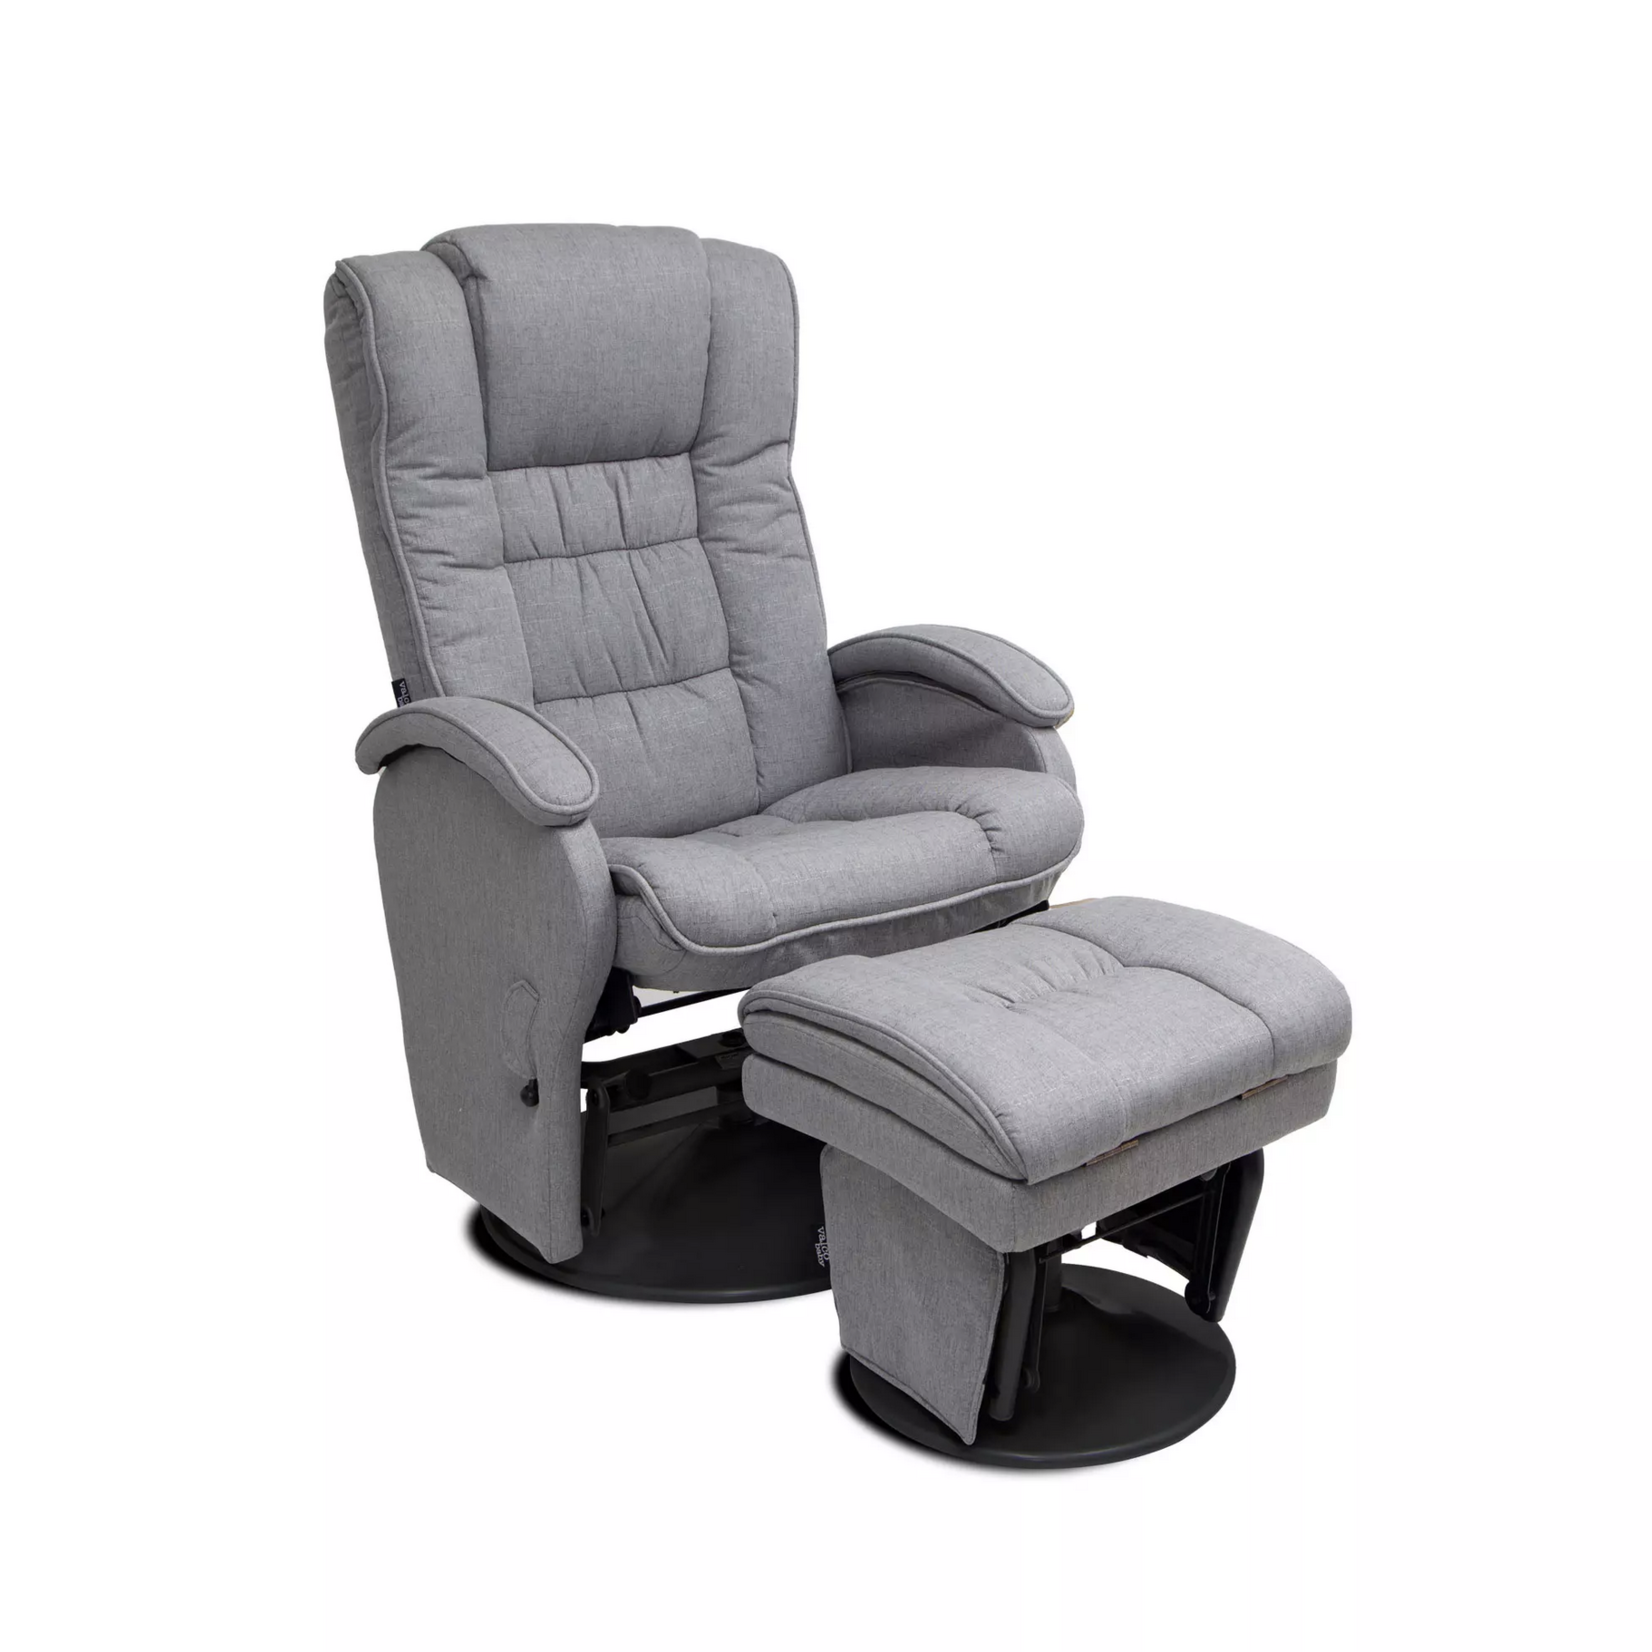 Valco Baby Eurobell Glider And Ottoman-Misty Grey